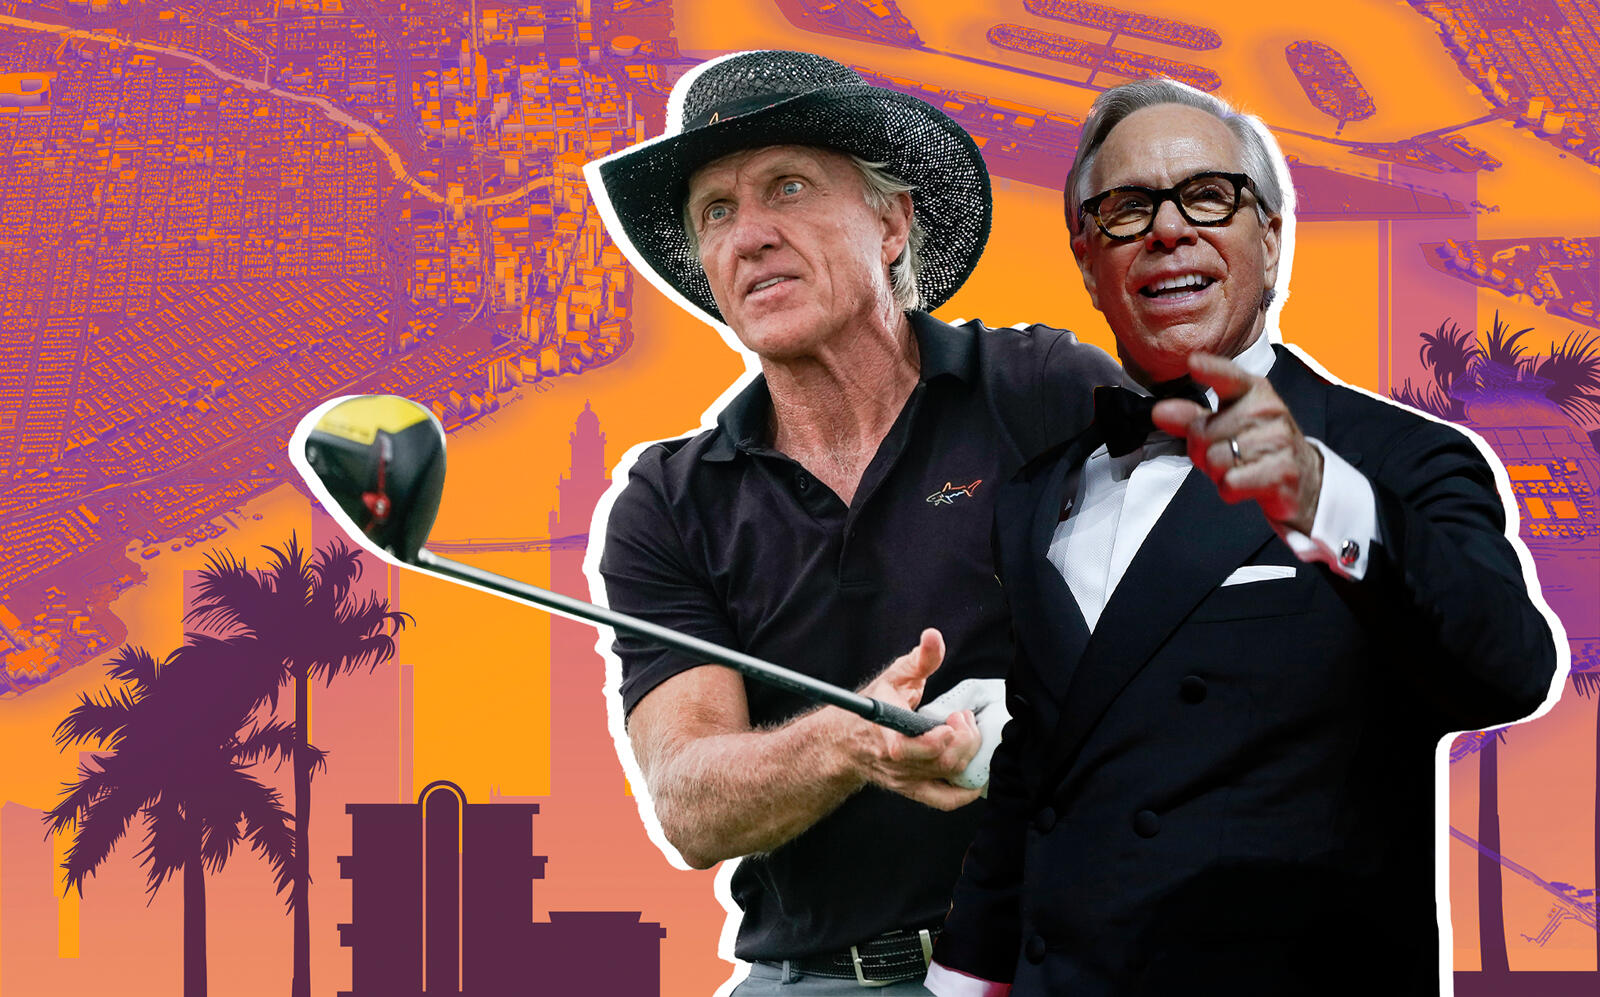 Greg Norman and Tommy Hilfiger (Getty, iStock)